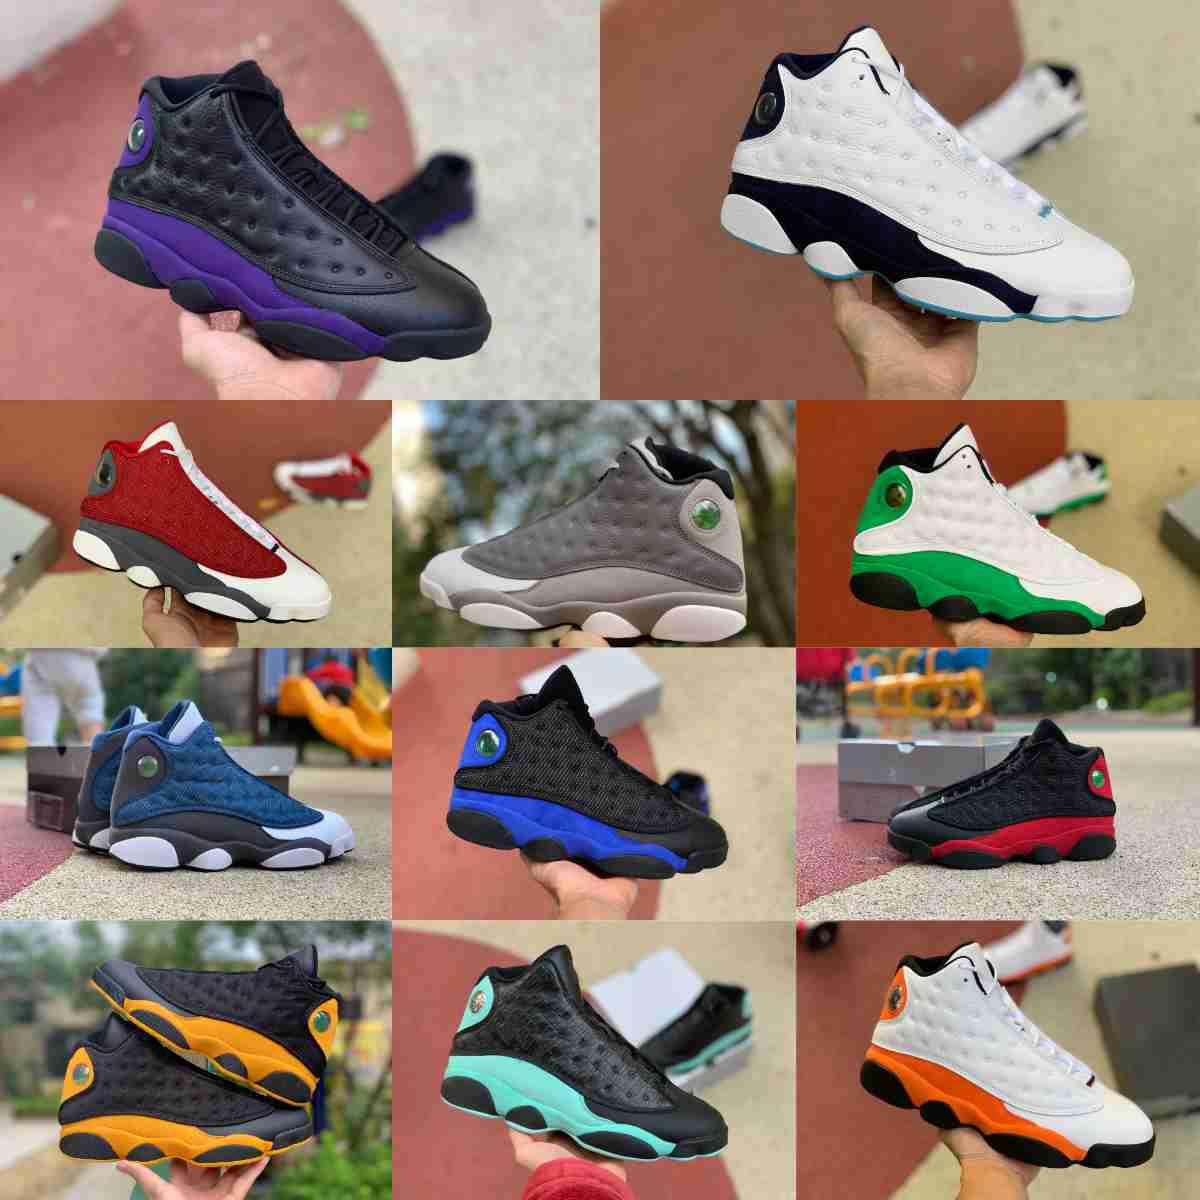 

Jumpman 13 13S Basketball Shoes Mens High Red Flint Bred Island Green Dirty Hyper Ray Allen PE Black Cat Court Purple Chicago Starfish He Got Game Trainer Sneakers, Please contact us